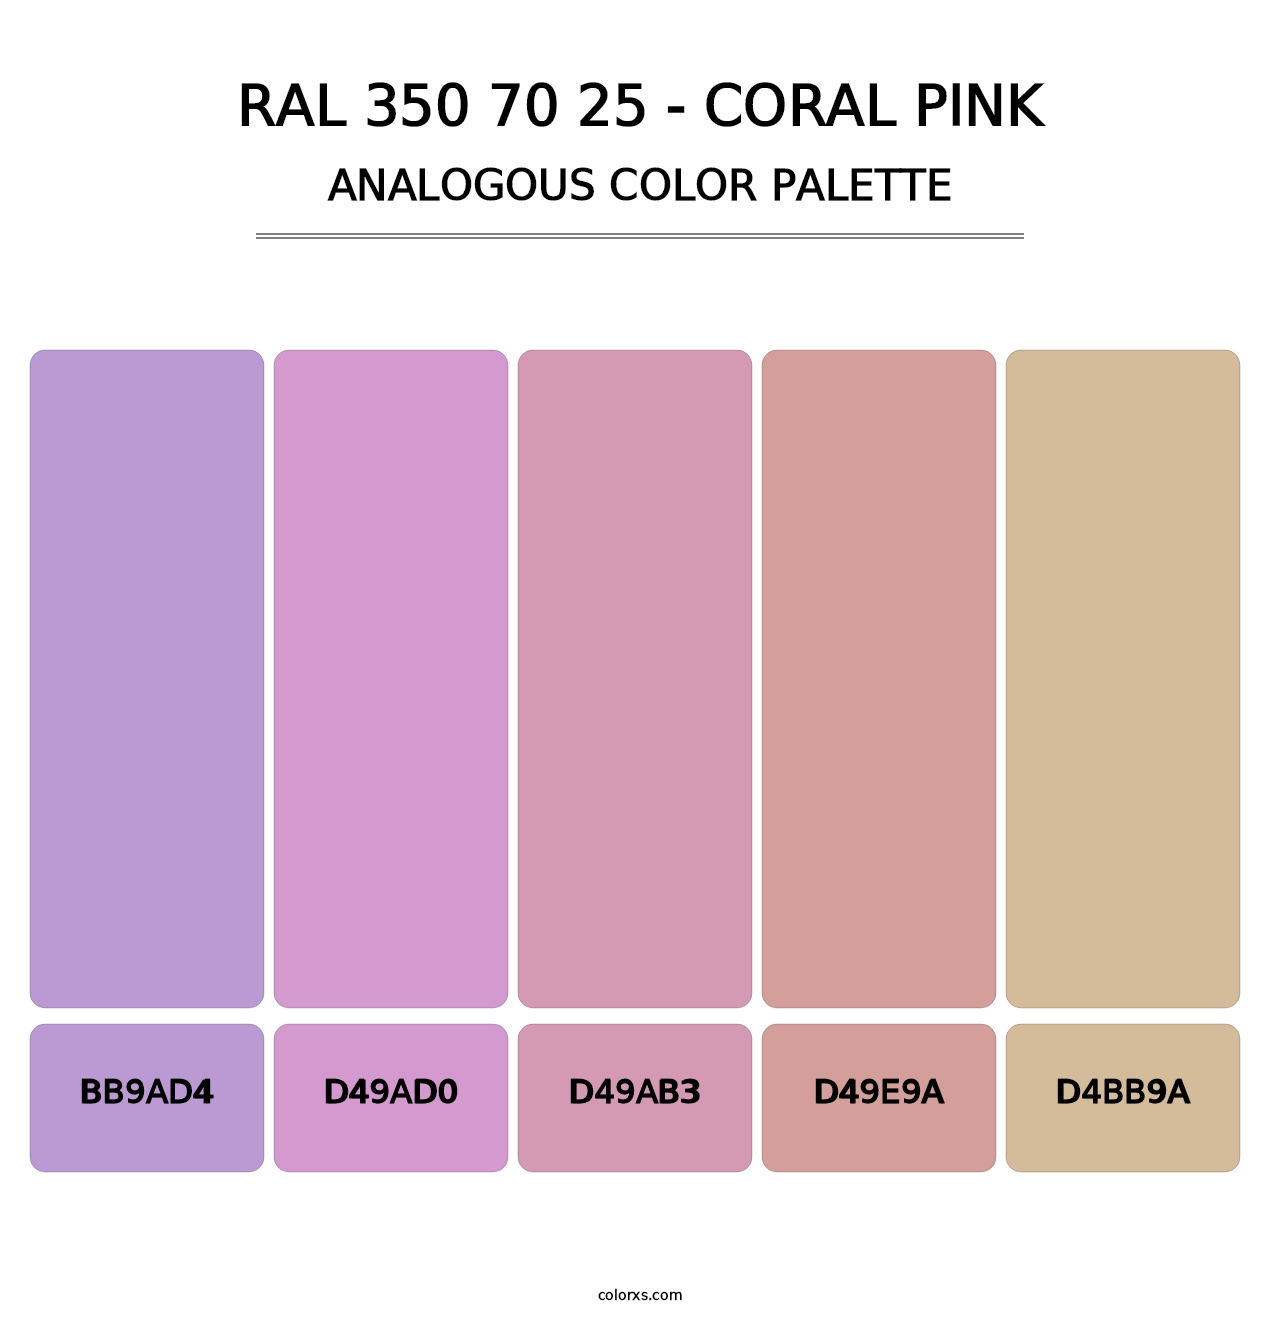 RAL 350 70 25 - Coral Pink - Analogous Color Palette